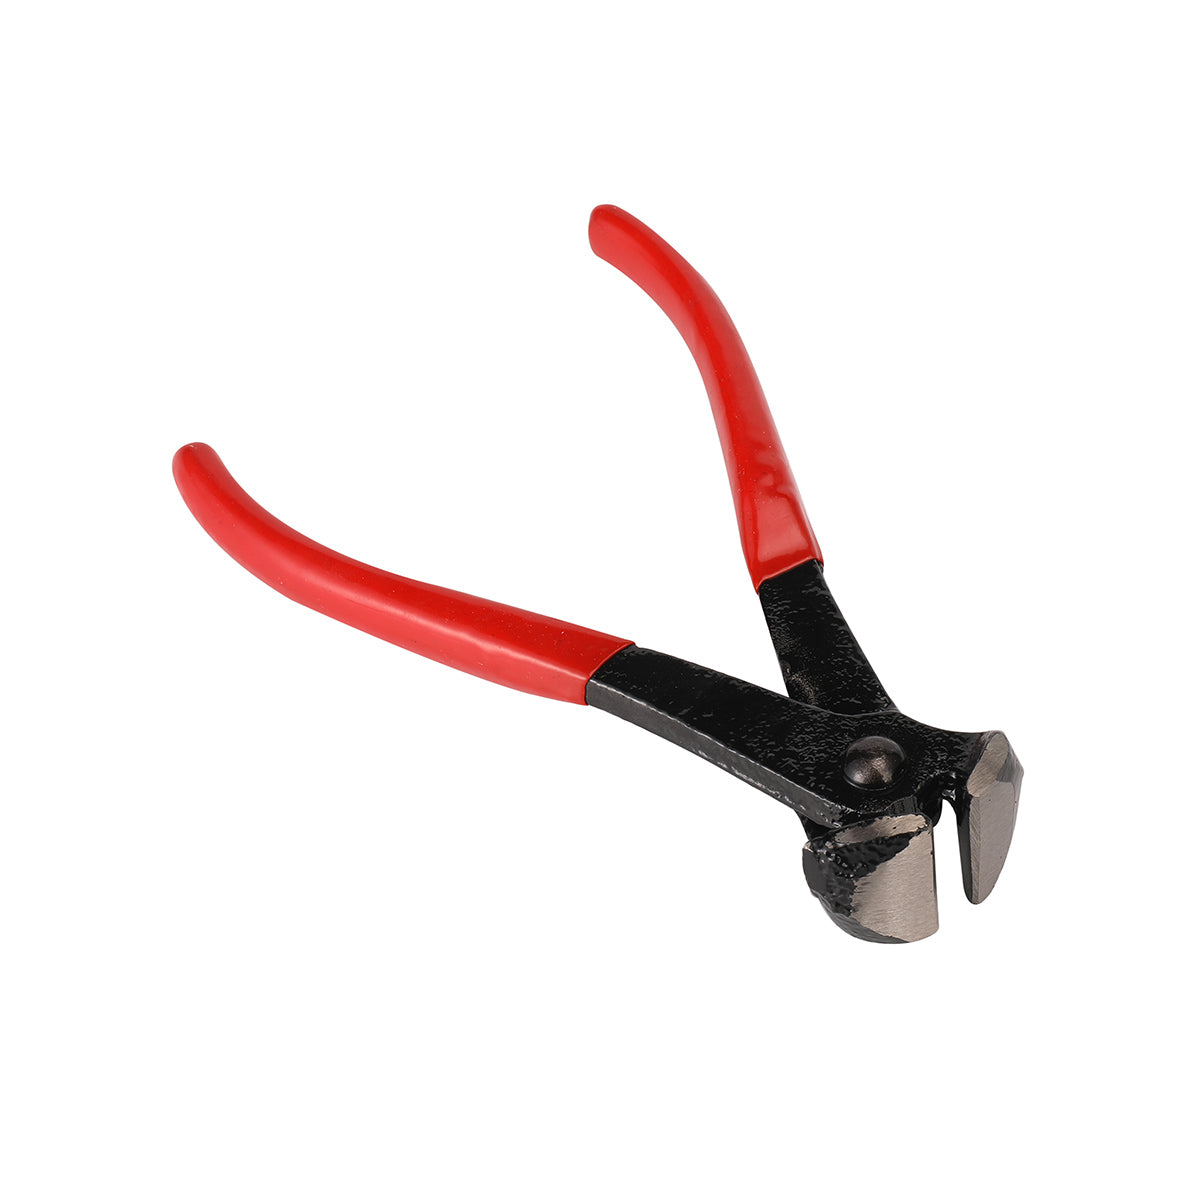 End Cutting Plier - 6inch - Red